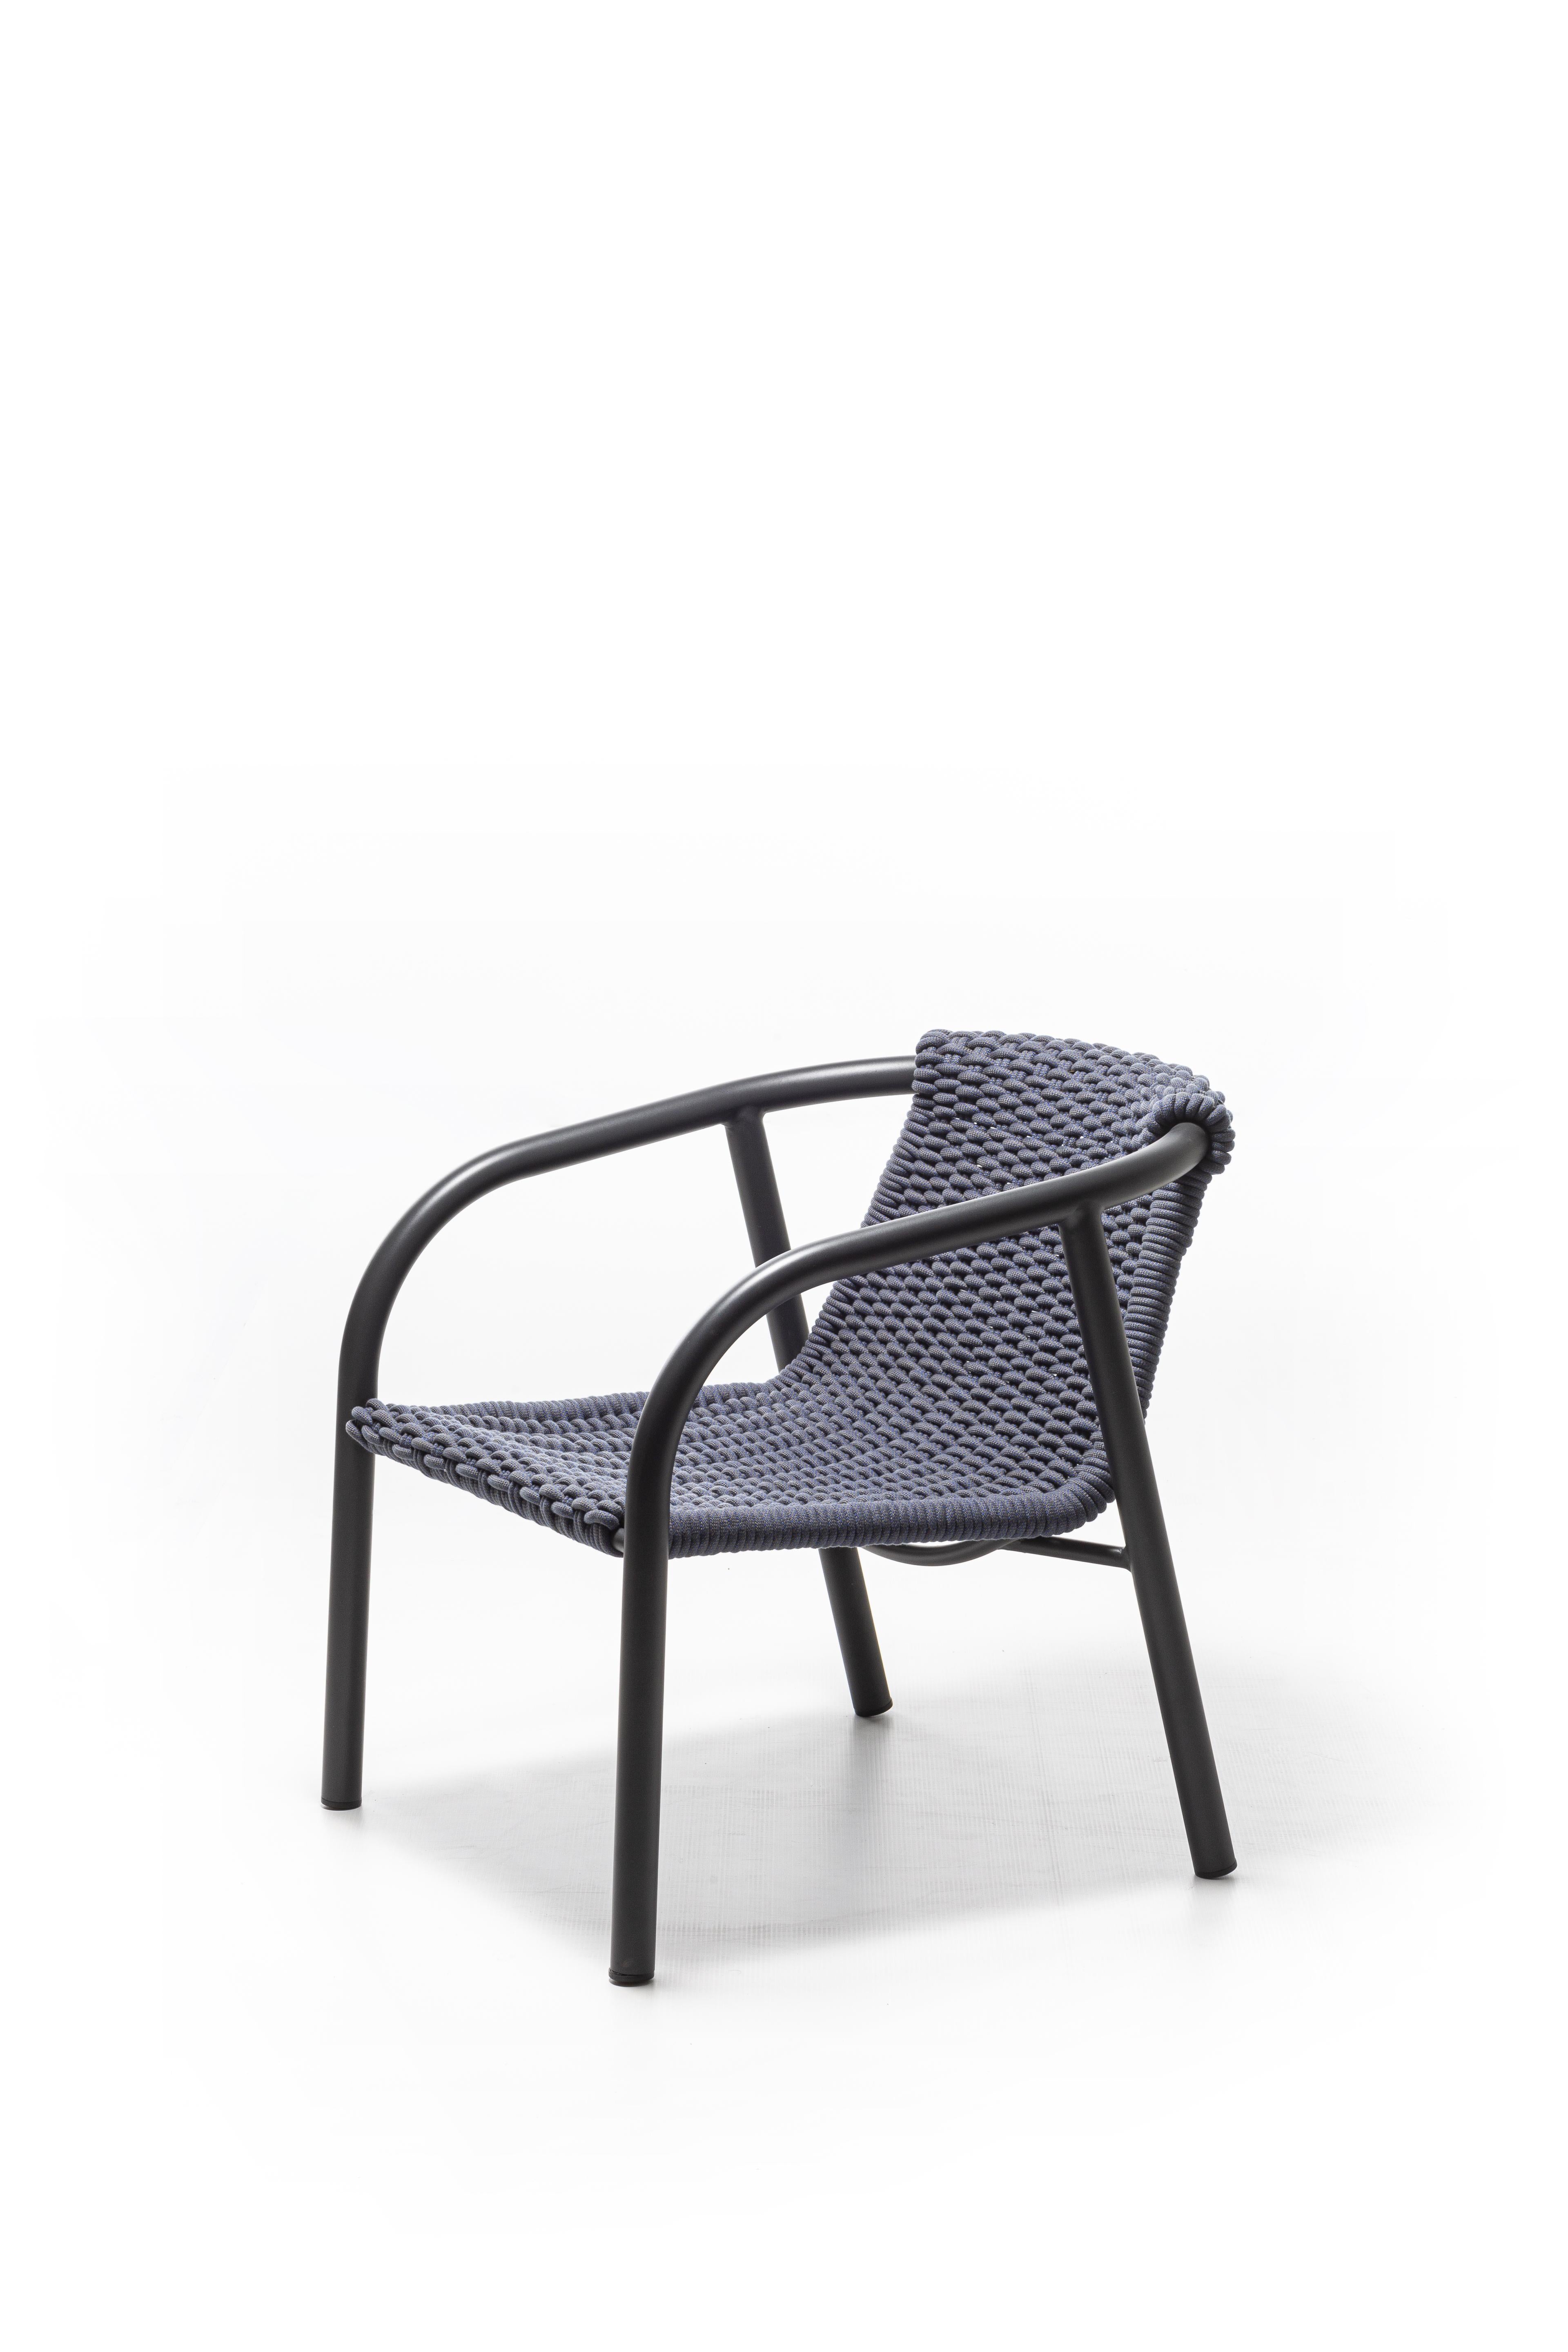 The Ken 26 lounge chair, characterised by a minimal and informal style, is formed by a structure in matt white or grey painted tubular aluminium, a unique metal for its technical qualities, combined with a handmade weaving in grey or blue polyester